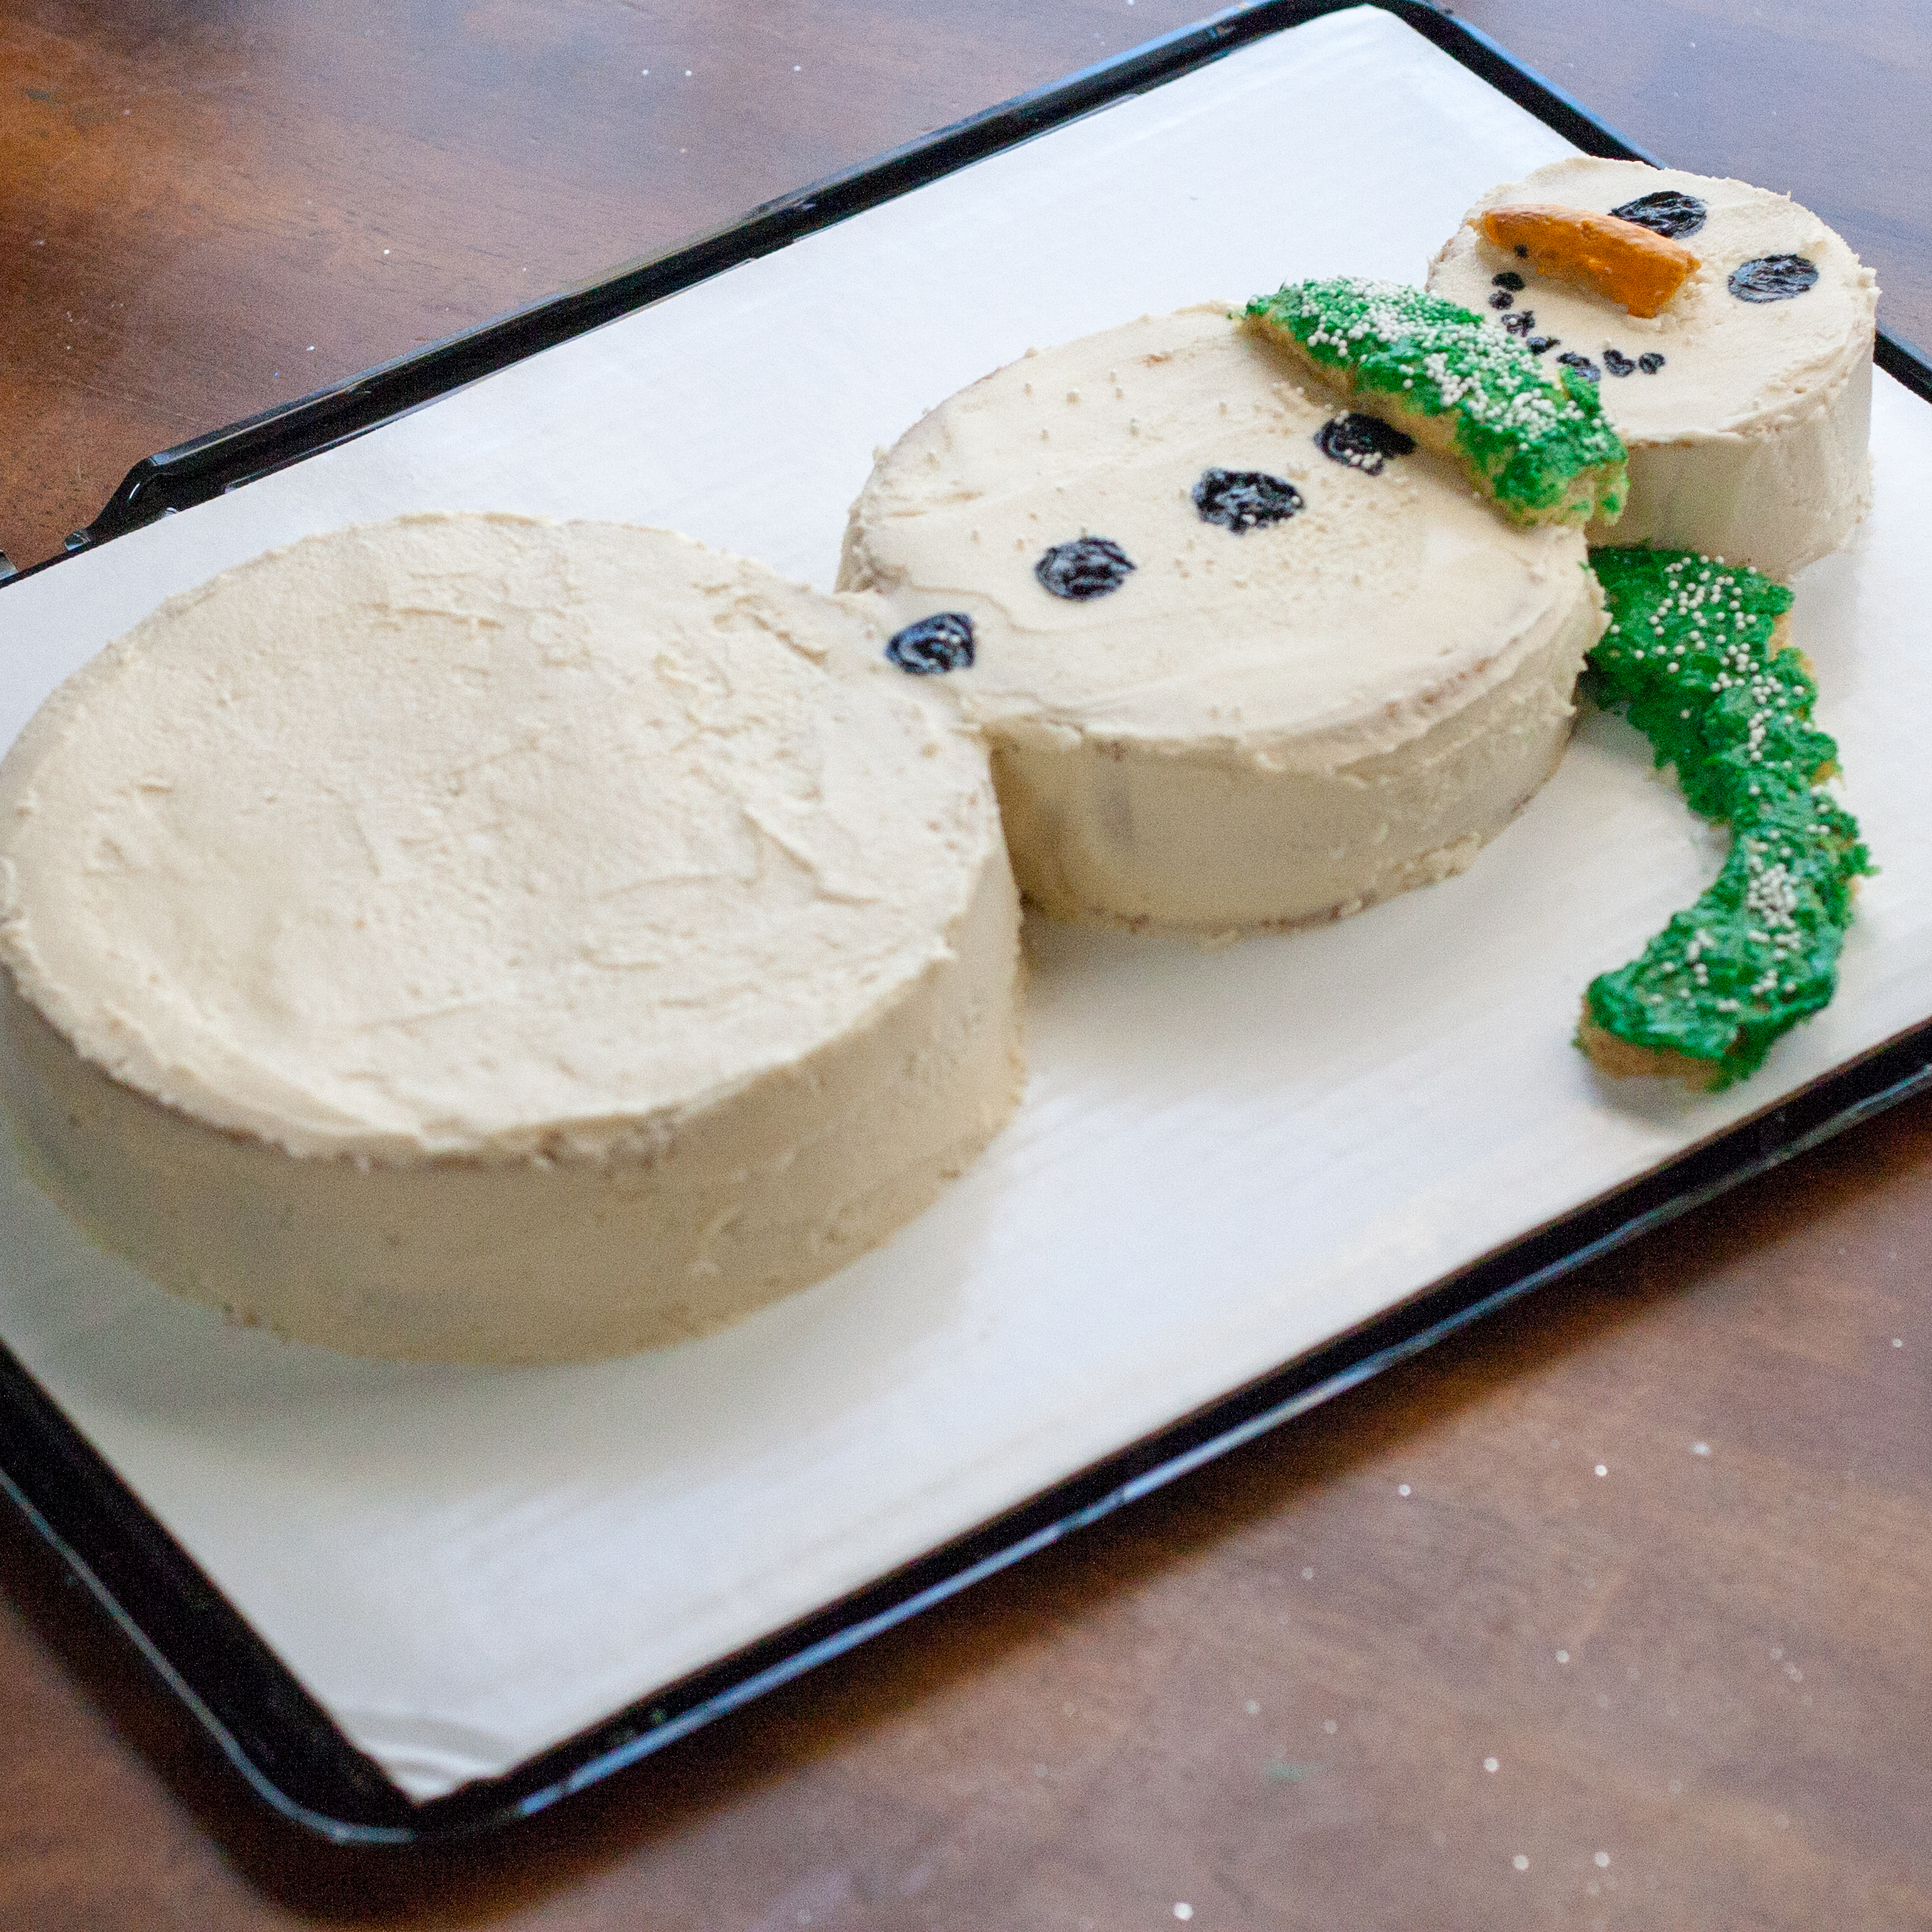 A white snowman cake decorated with black eyes, an orange carrot nose, four black buttons, and a green scarf.